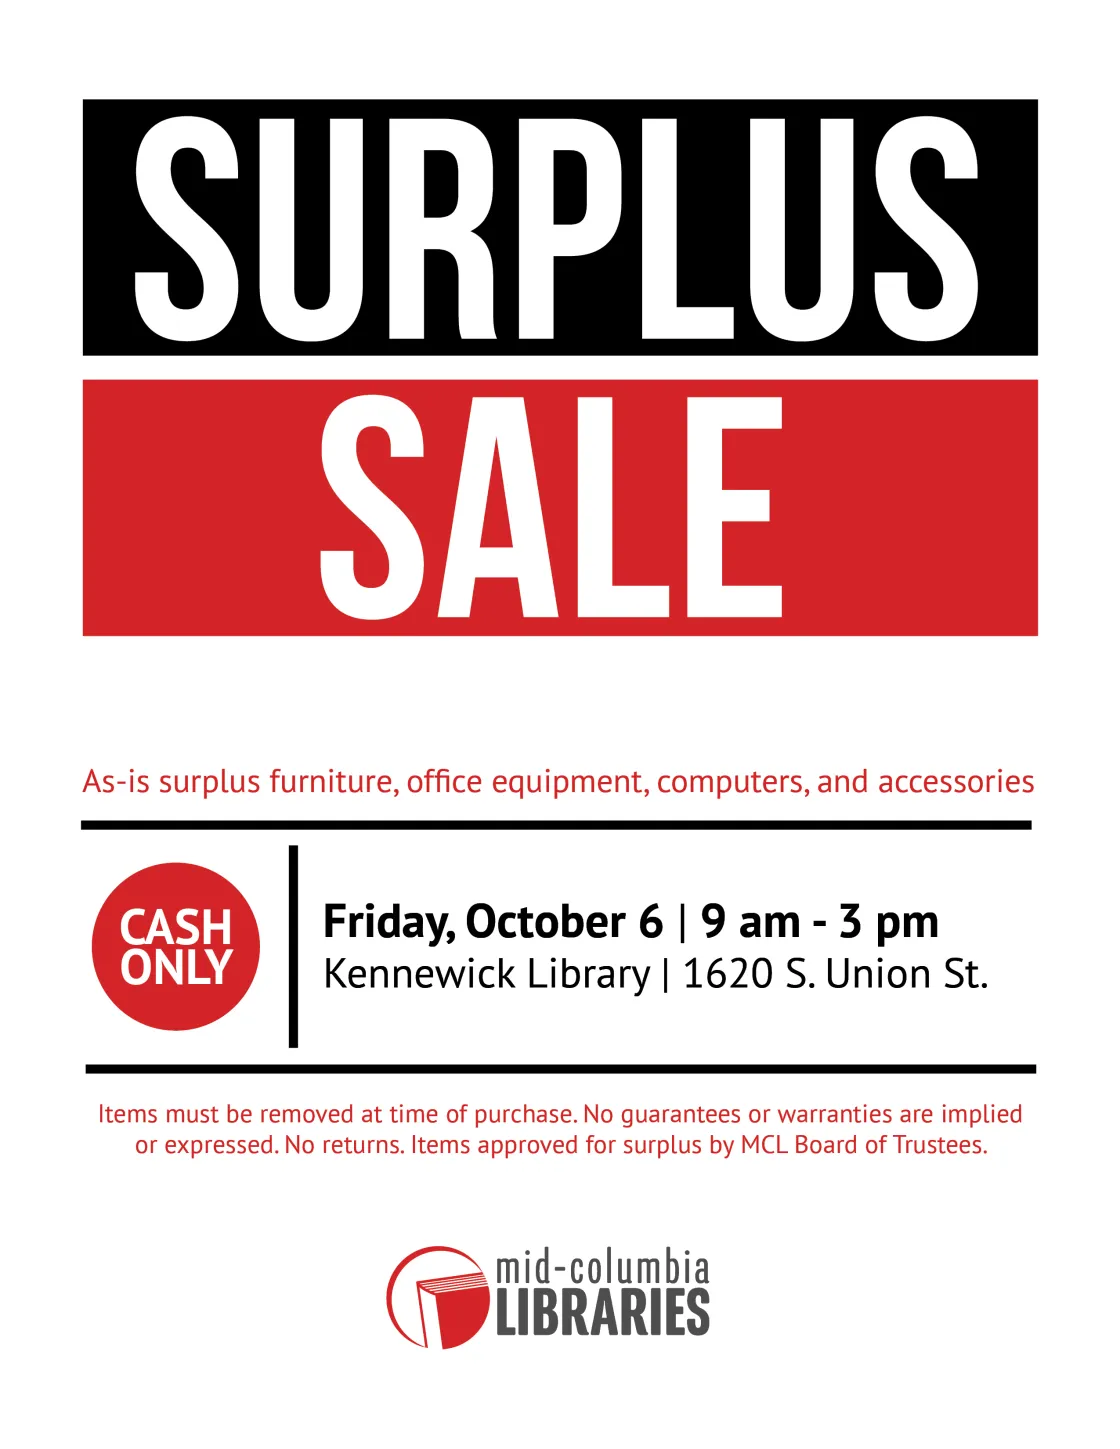 Surplus Sale. As-is surplus furniture, office equipment, computers and accessories. Cash Only. Friday, Oct. 6 from 9 am to 3 pm. Items must be removed at time of purchase. No guarantees or warranties are implied or expressed. No returns. Items approved for surplus by MCL Board of Trustees.